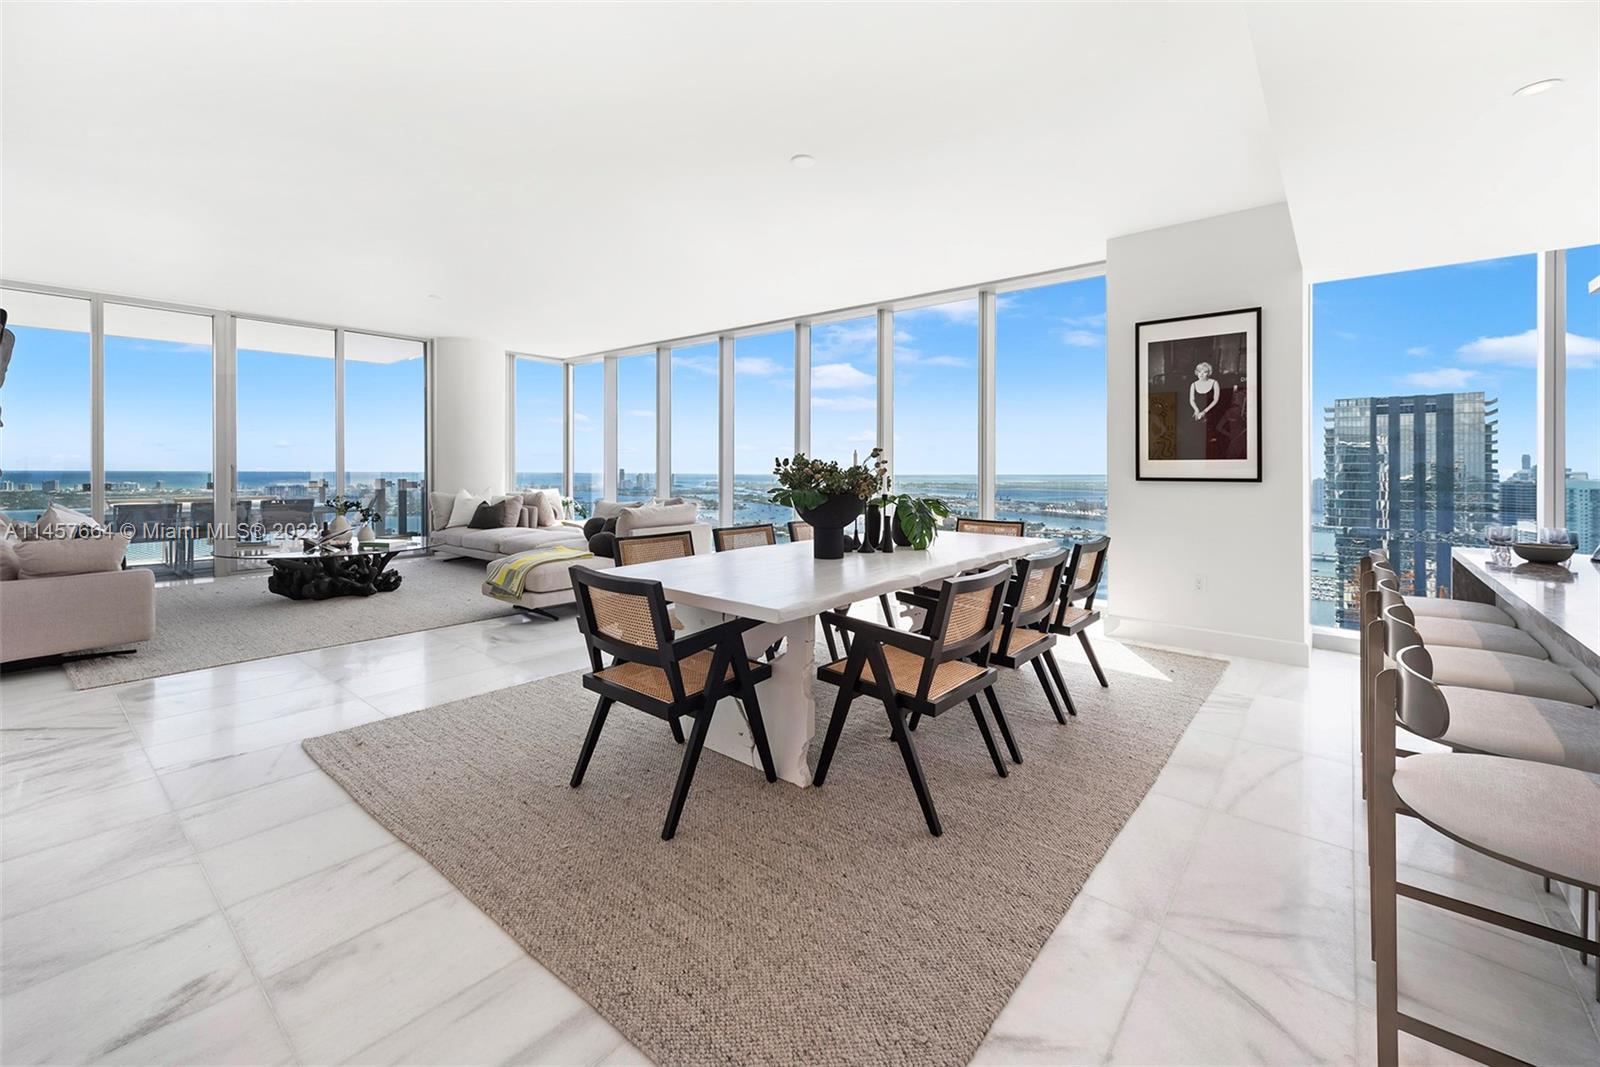 Priced to sell! Four floors below the penthouse with 270-degree ocean, bay and city views, this spac